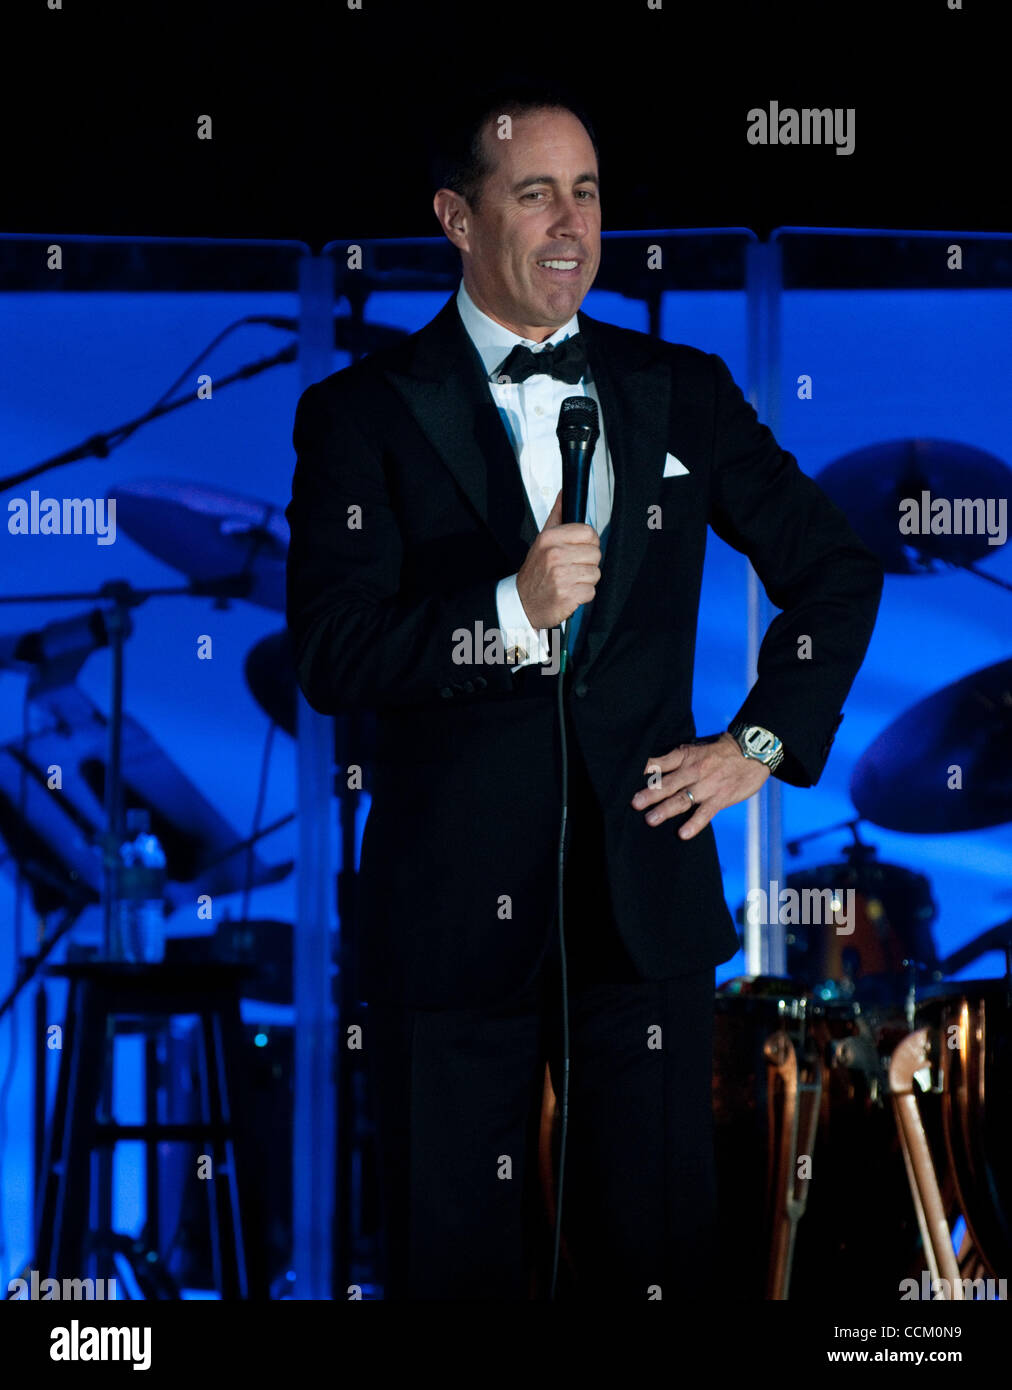 November 13th, 2010, Philadelphia PA, USA-Actress and Comedian, JERRY SEINFELD, performed at black tie gala of the National Museum of Jewish American History opening weekend festivities. The National Museum of Jewish American History is the first and only National Jewish American History Museum in t Stock Photo